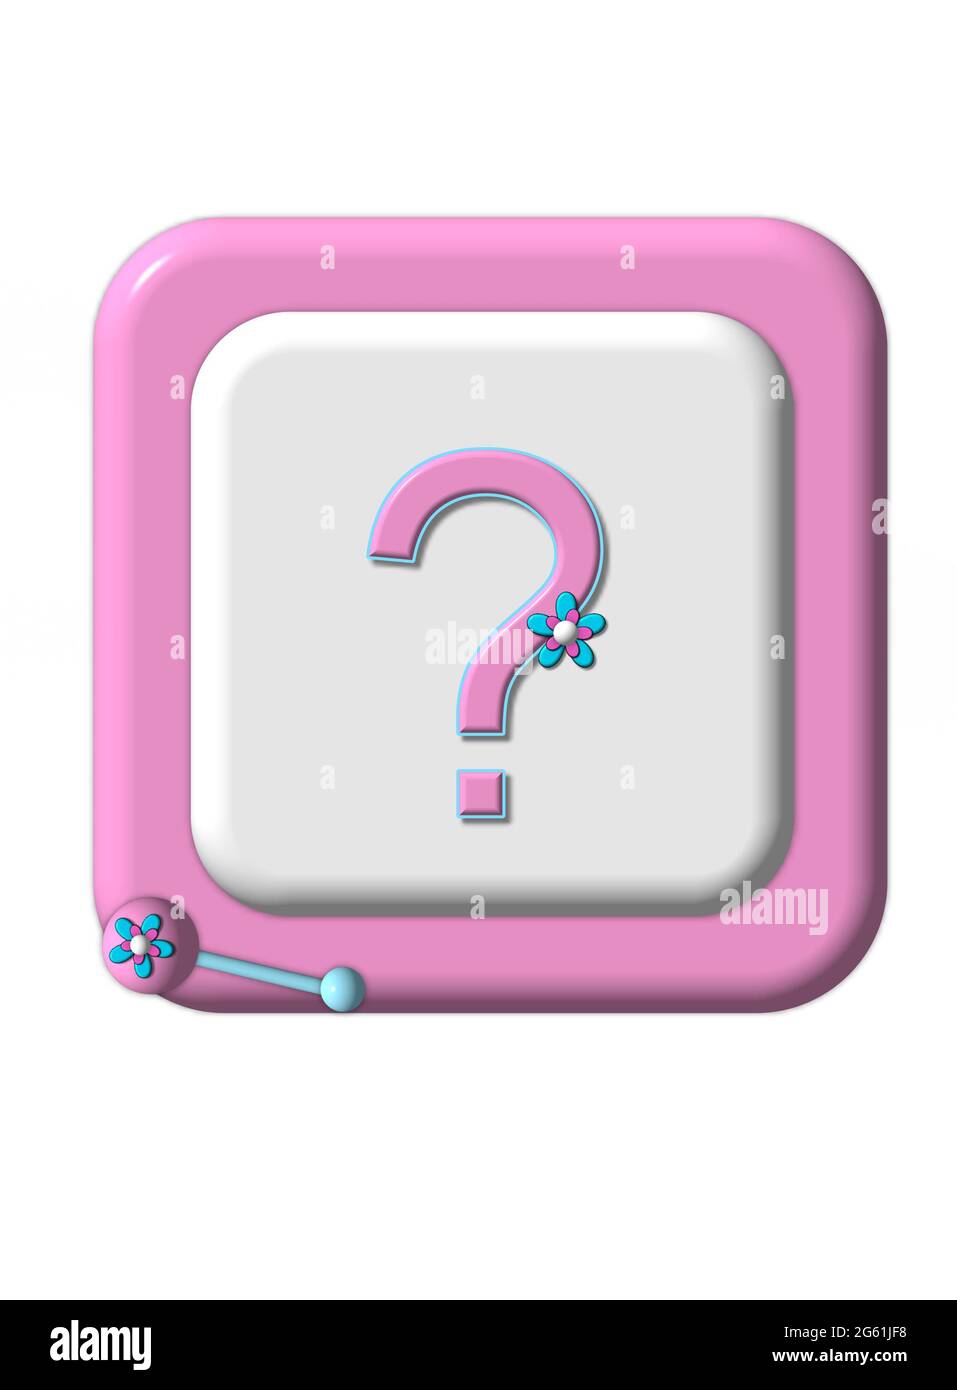 Pink rimmed baby block has question mark on it and is surrounded by baby toys.  Illustration could represent surpises, unknown gender, unexpected, sup Stock Photo